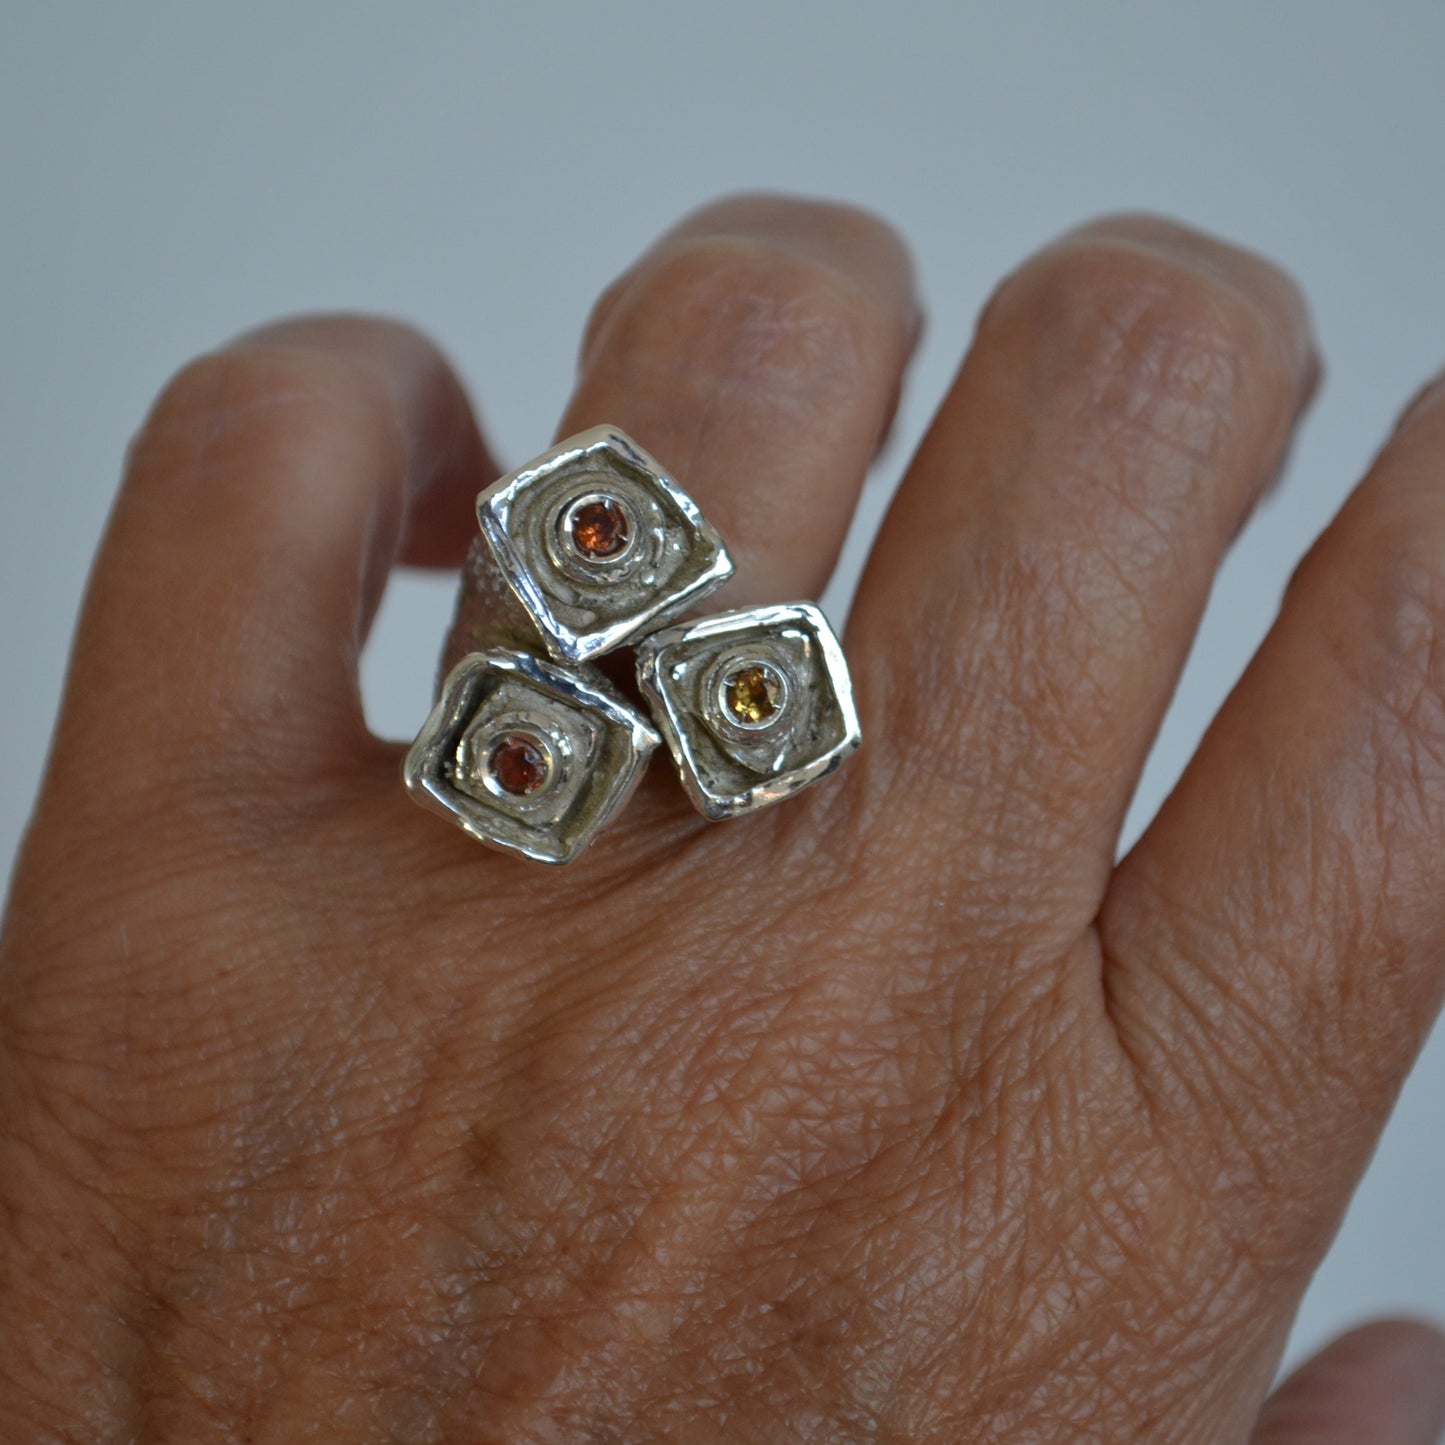 Hand with recycled silver ring with orange-yellow sapphires